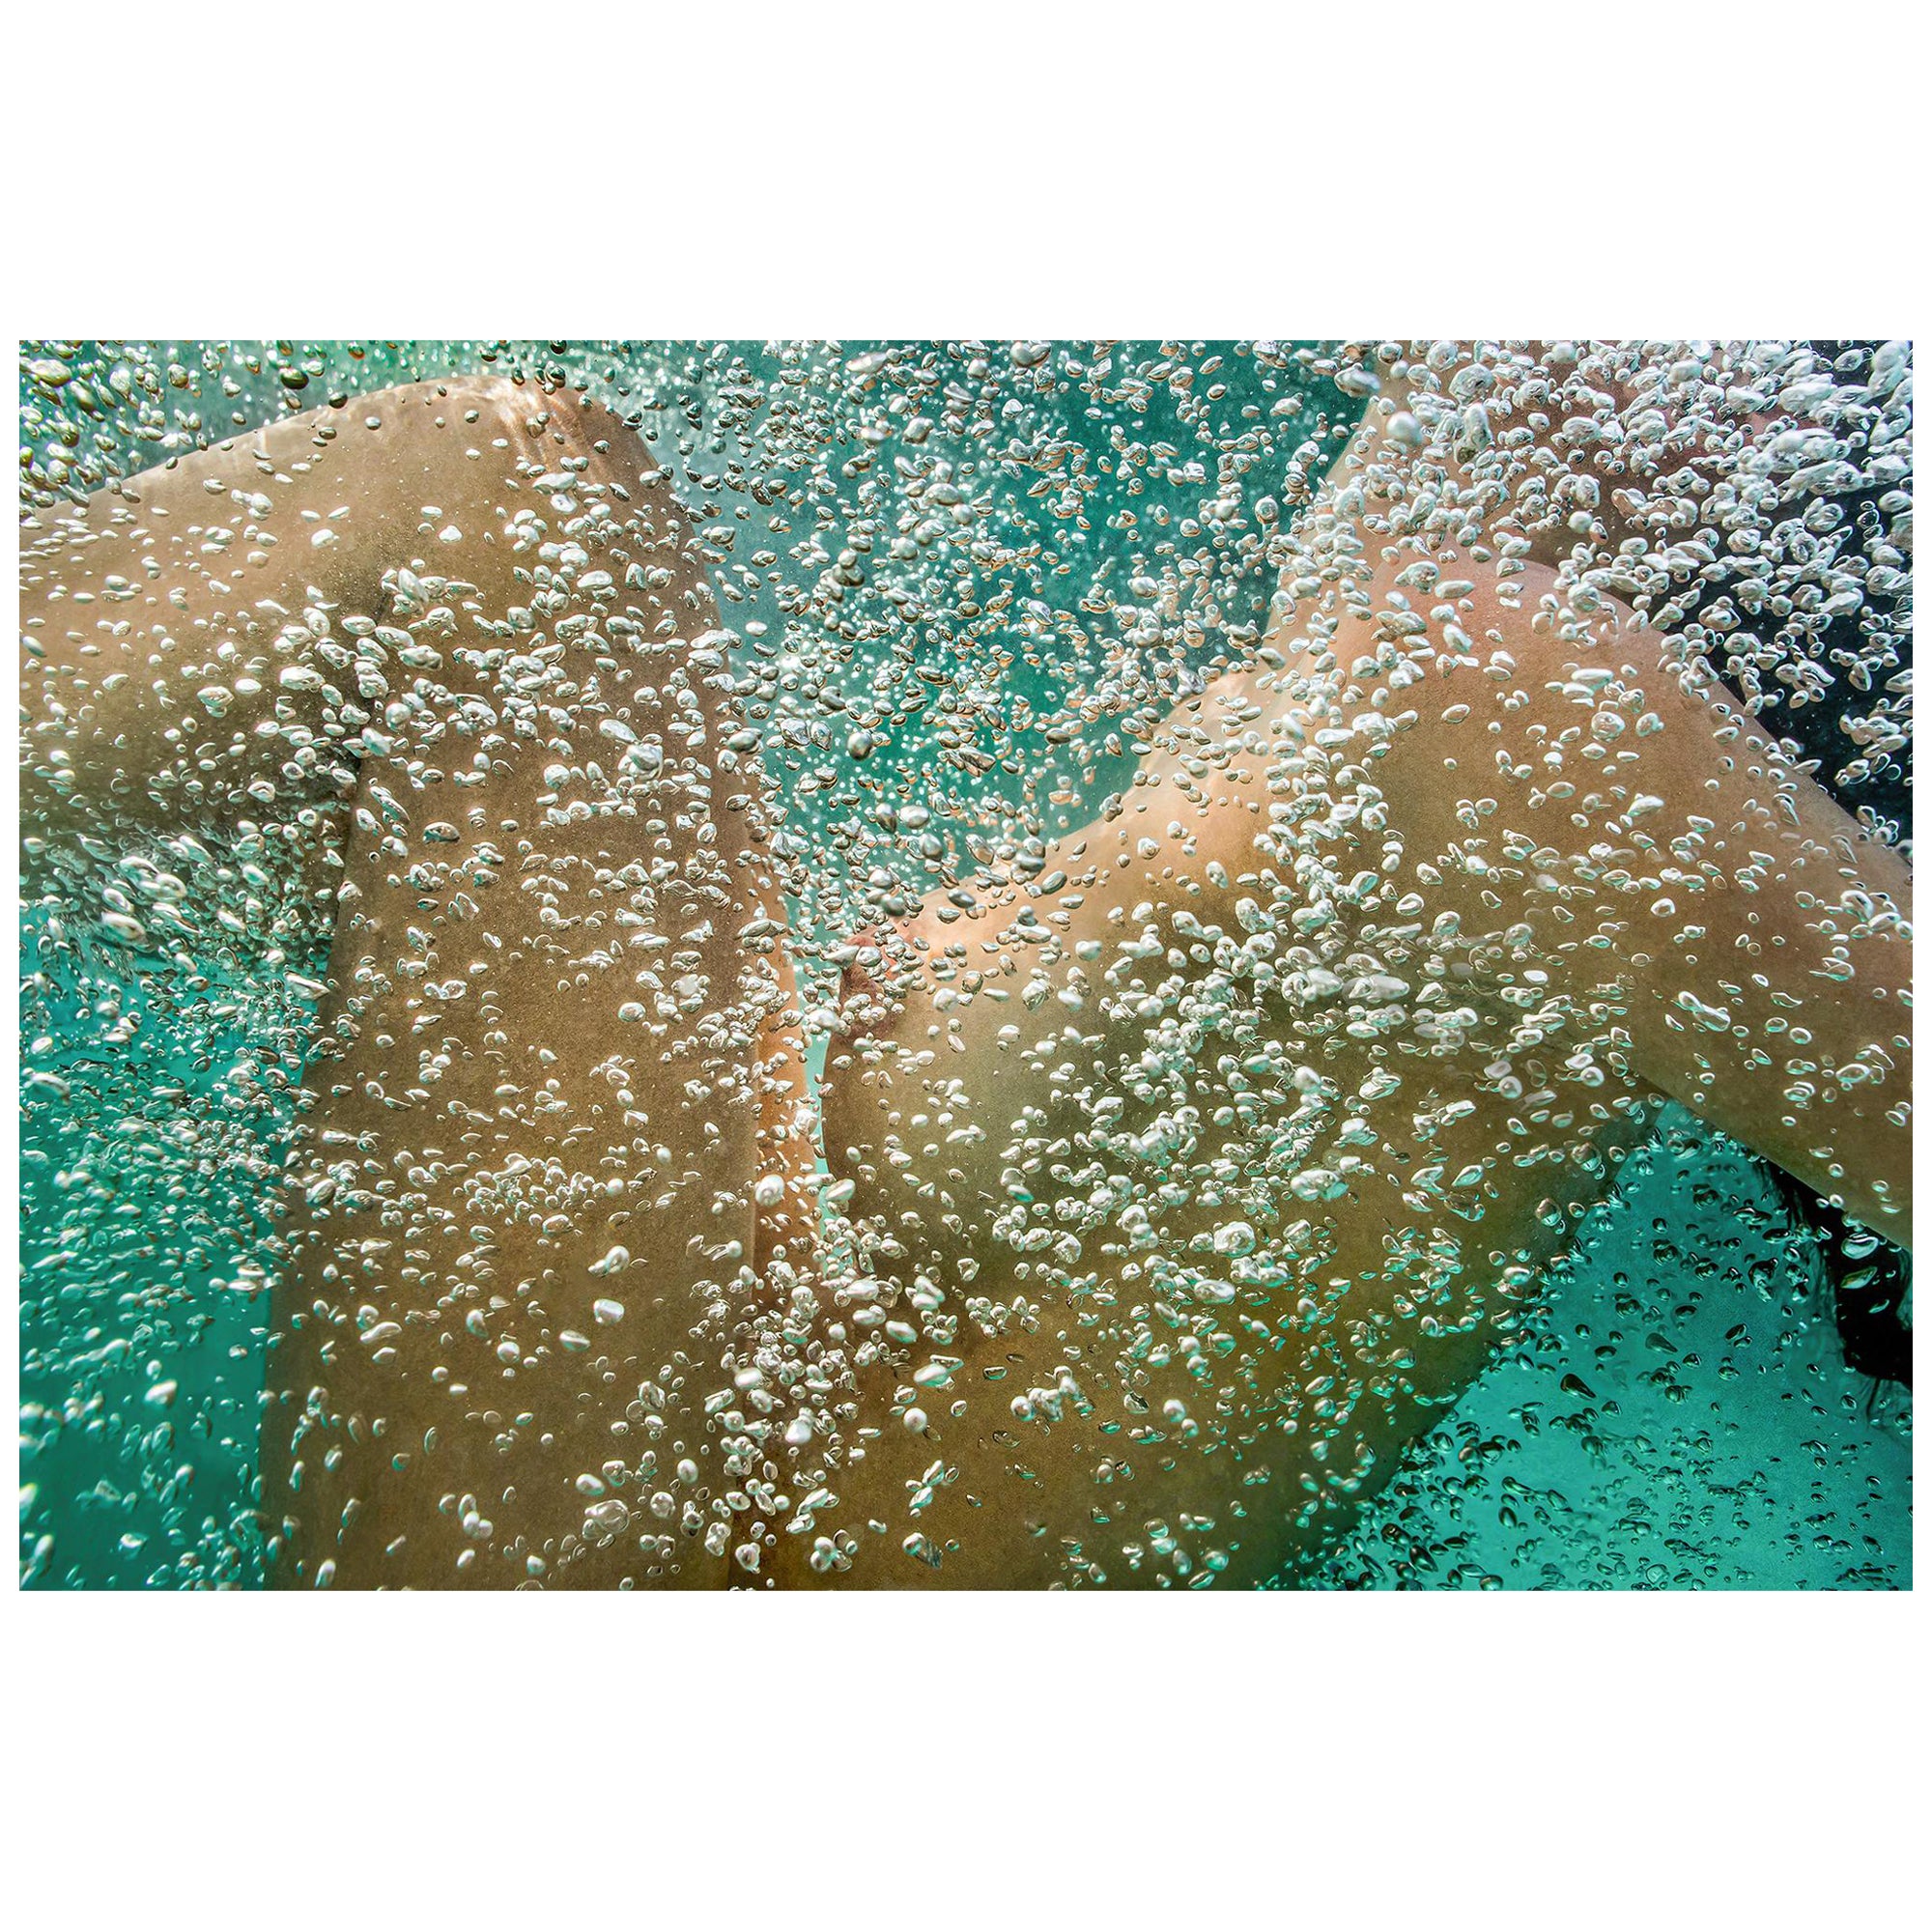 Alex Sher Nude Photograph - Champagne - underwater nude photograph - archival pigment 23x35"